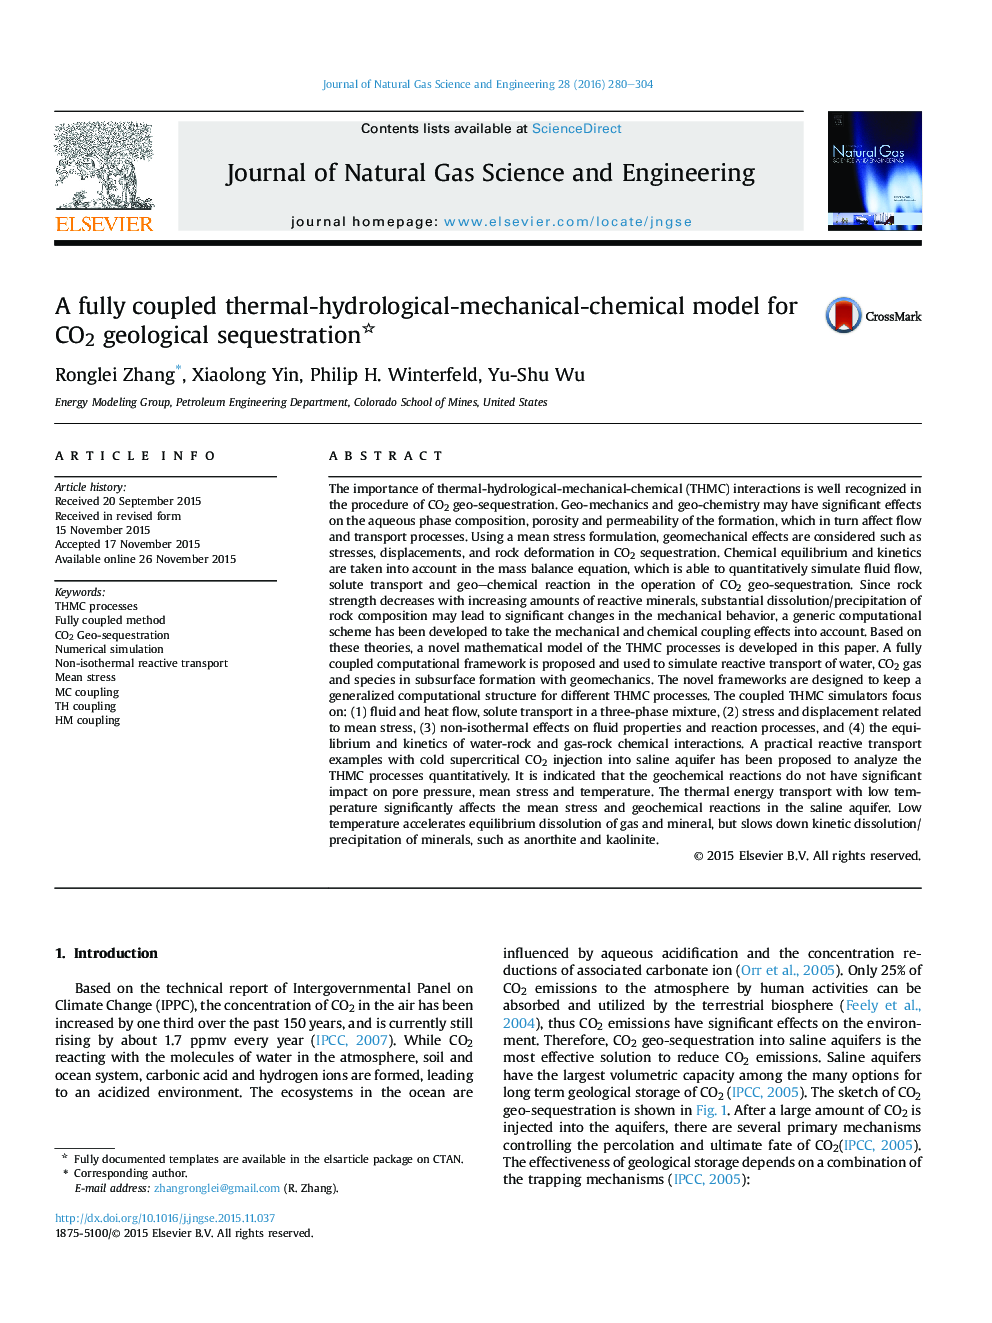 A fully coupled thermal-hydrological-mechanical-chemical model for CO2 geological sequestration